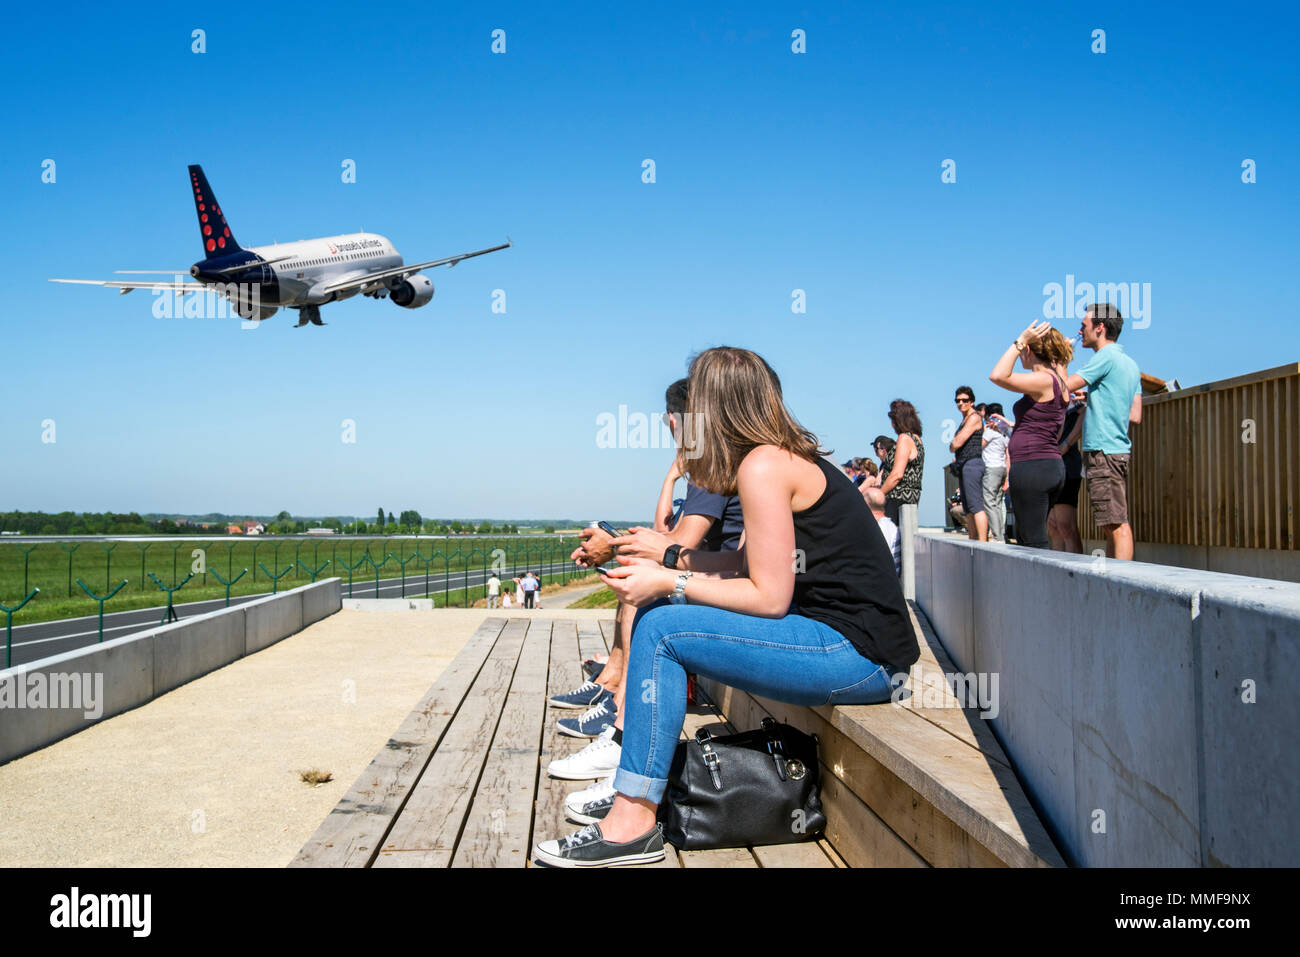 Plane spotters on aircraft spotting platform watching airplane from Brussels Airlines taking off from runway at Brussels Airport, Zaventem, Belgium Stock Photo